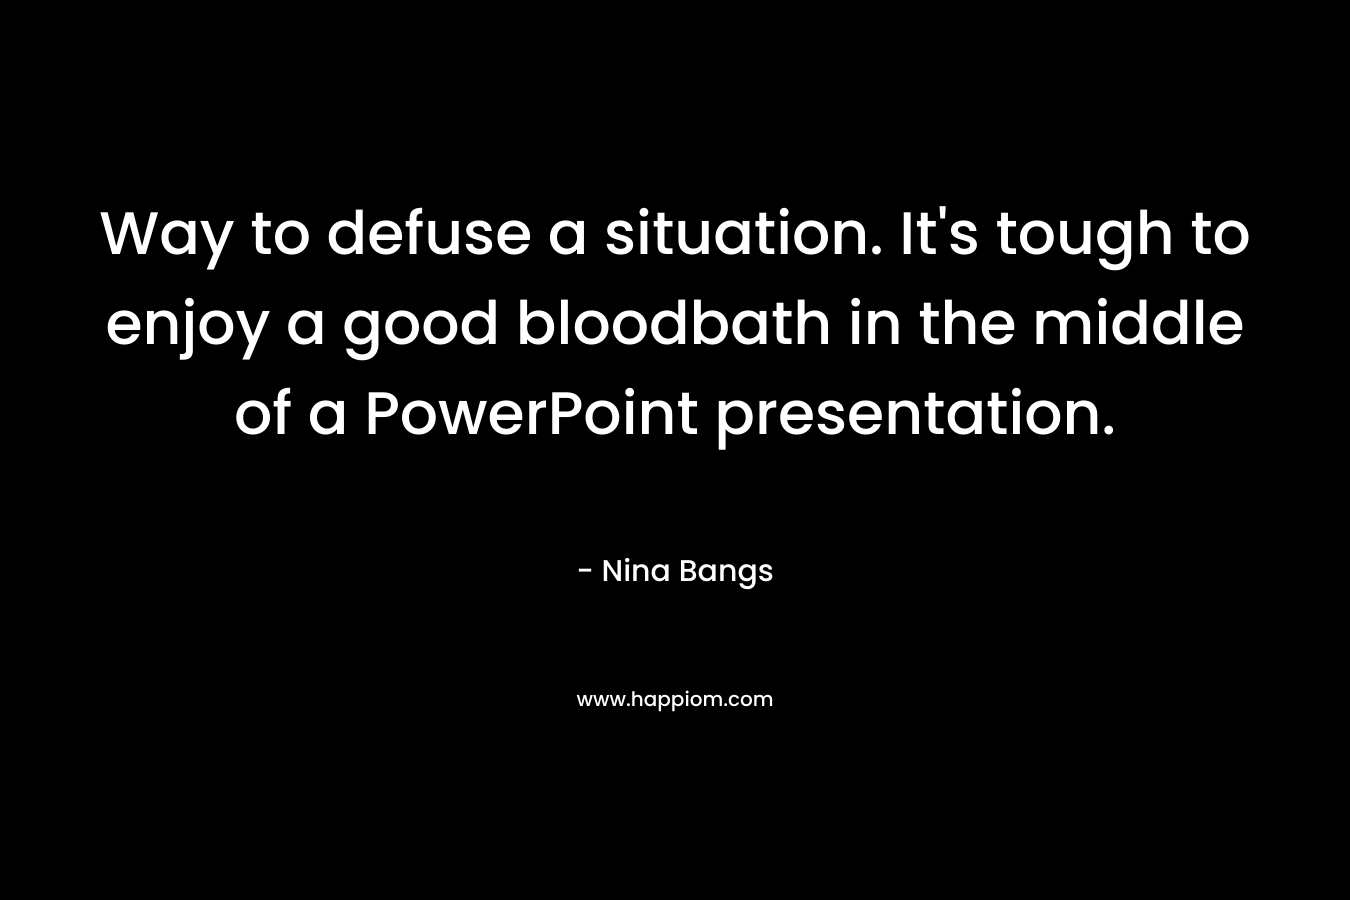 Way to defuse a situation. It's tough to enjoy a good bloodbath in the middle of a PowerPoint presentation.